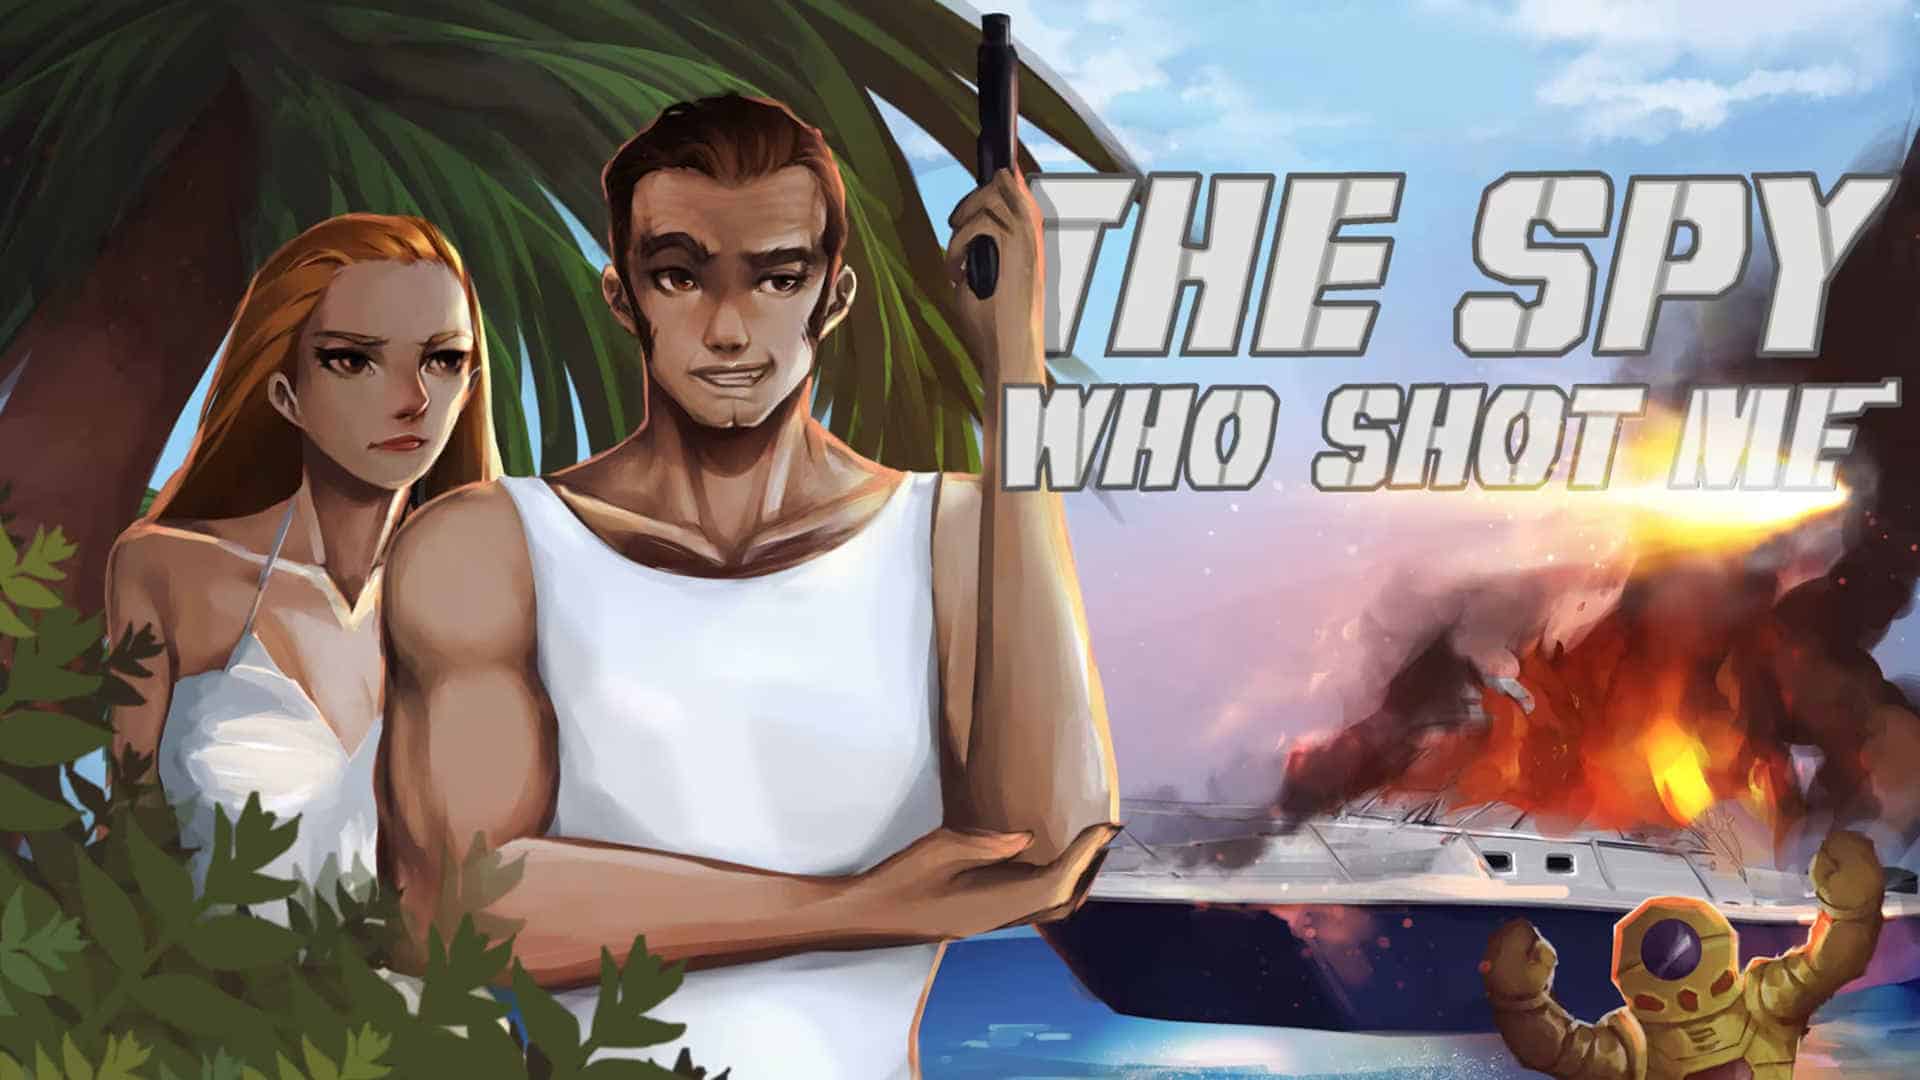 The Spy Who Shot Me game release